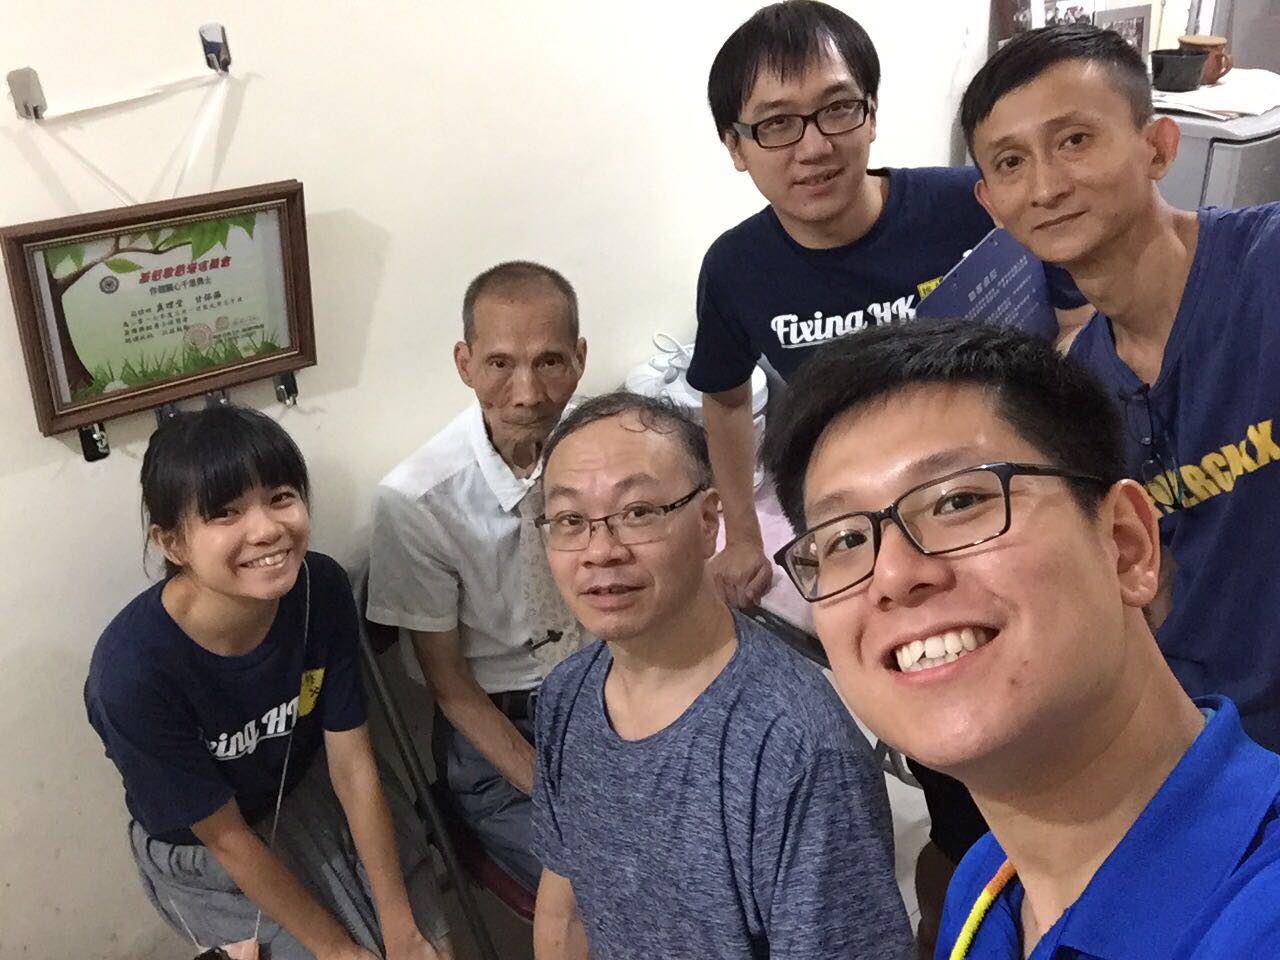 A picture of members from Fixing Hong Kong via the group’s Facebook page